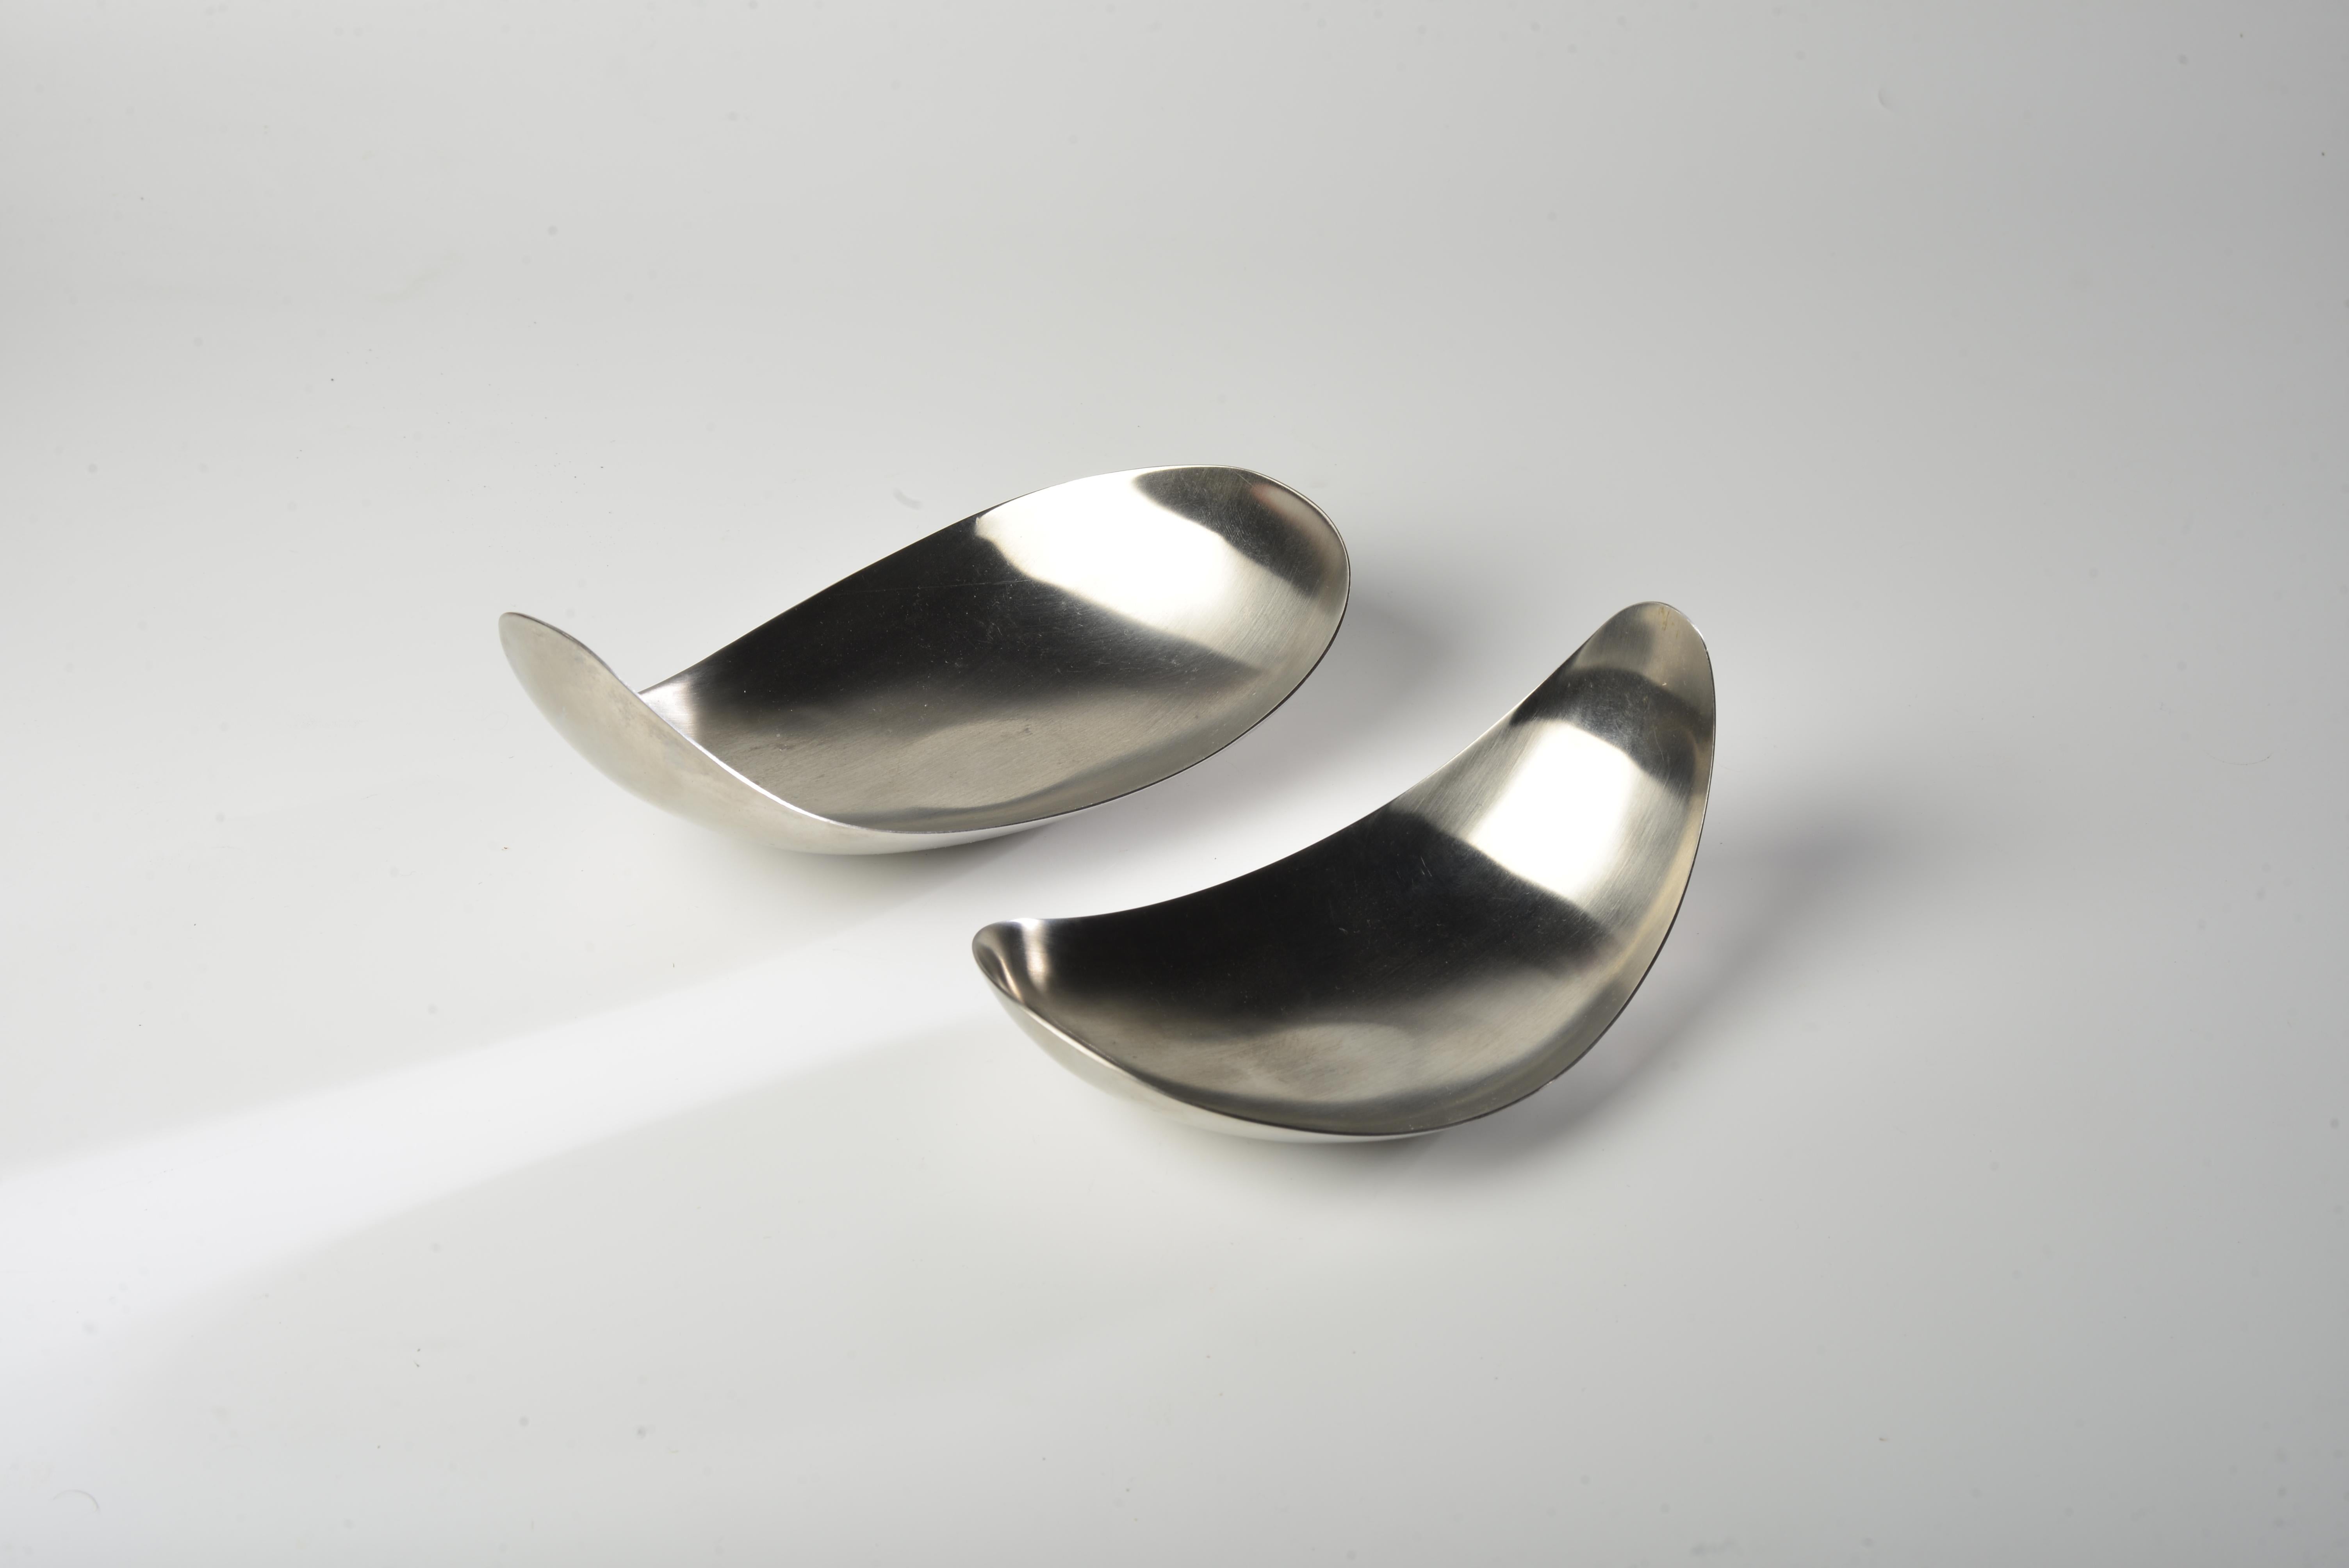 Two stainless steel dishes or pocket trays, Leaf model, design by Helle Damkjær, published by Georg Jensen in Denmark. The shape is inspired by the magnolia flower. 
(Price per pair)